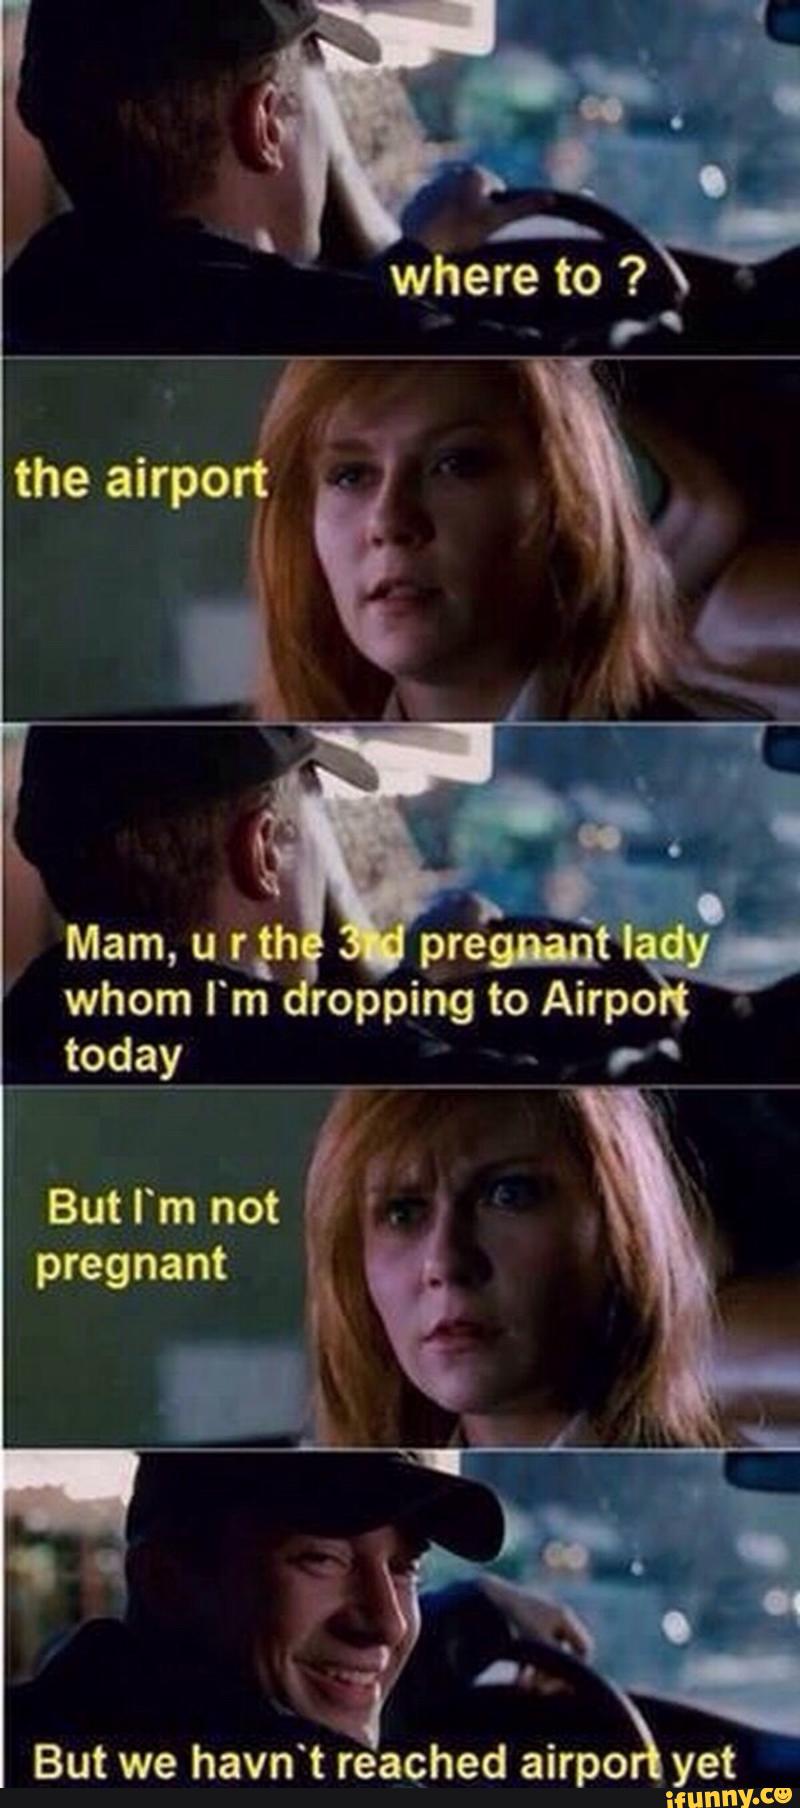 cab meme - where to? the airport Mam, ur the 3rd pregnant lady whom I'm dropping to Airport today But I'm not pregnant But we havn't reached airport yet ifunny.co